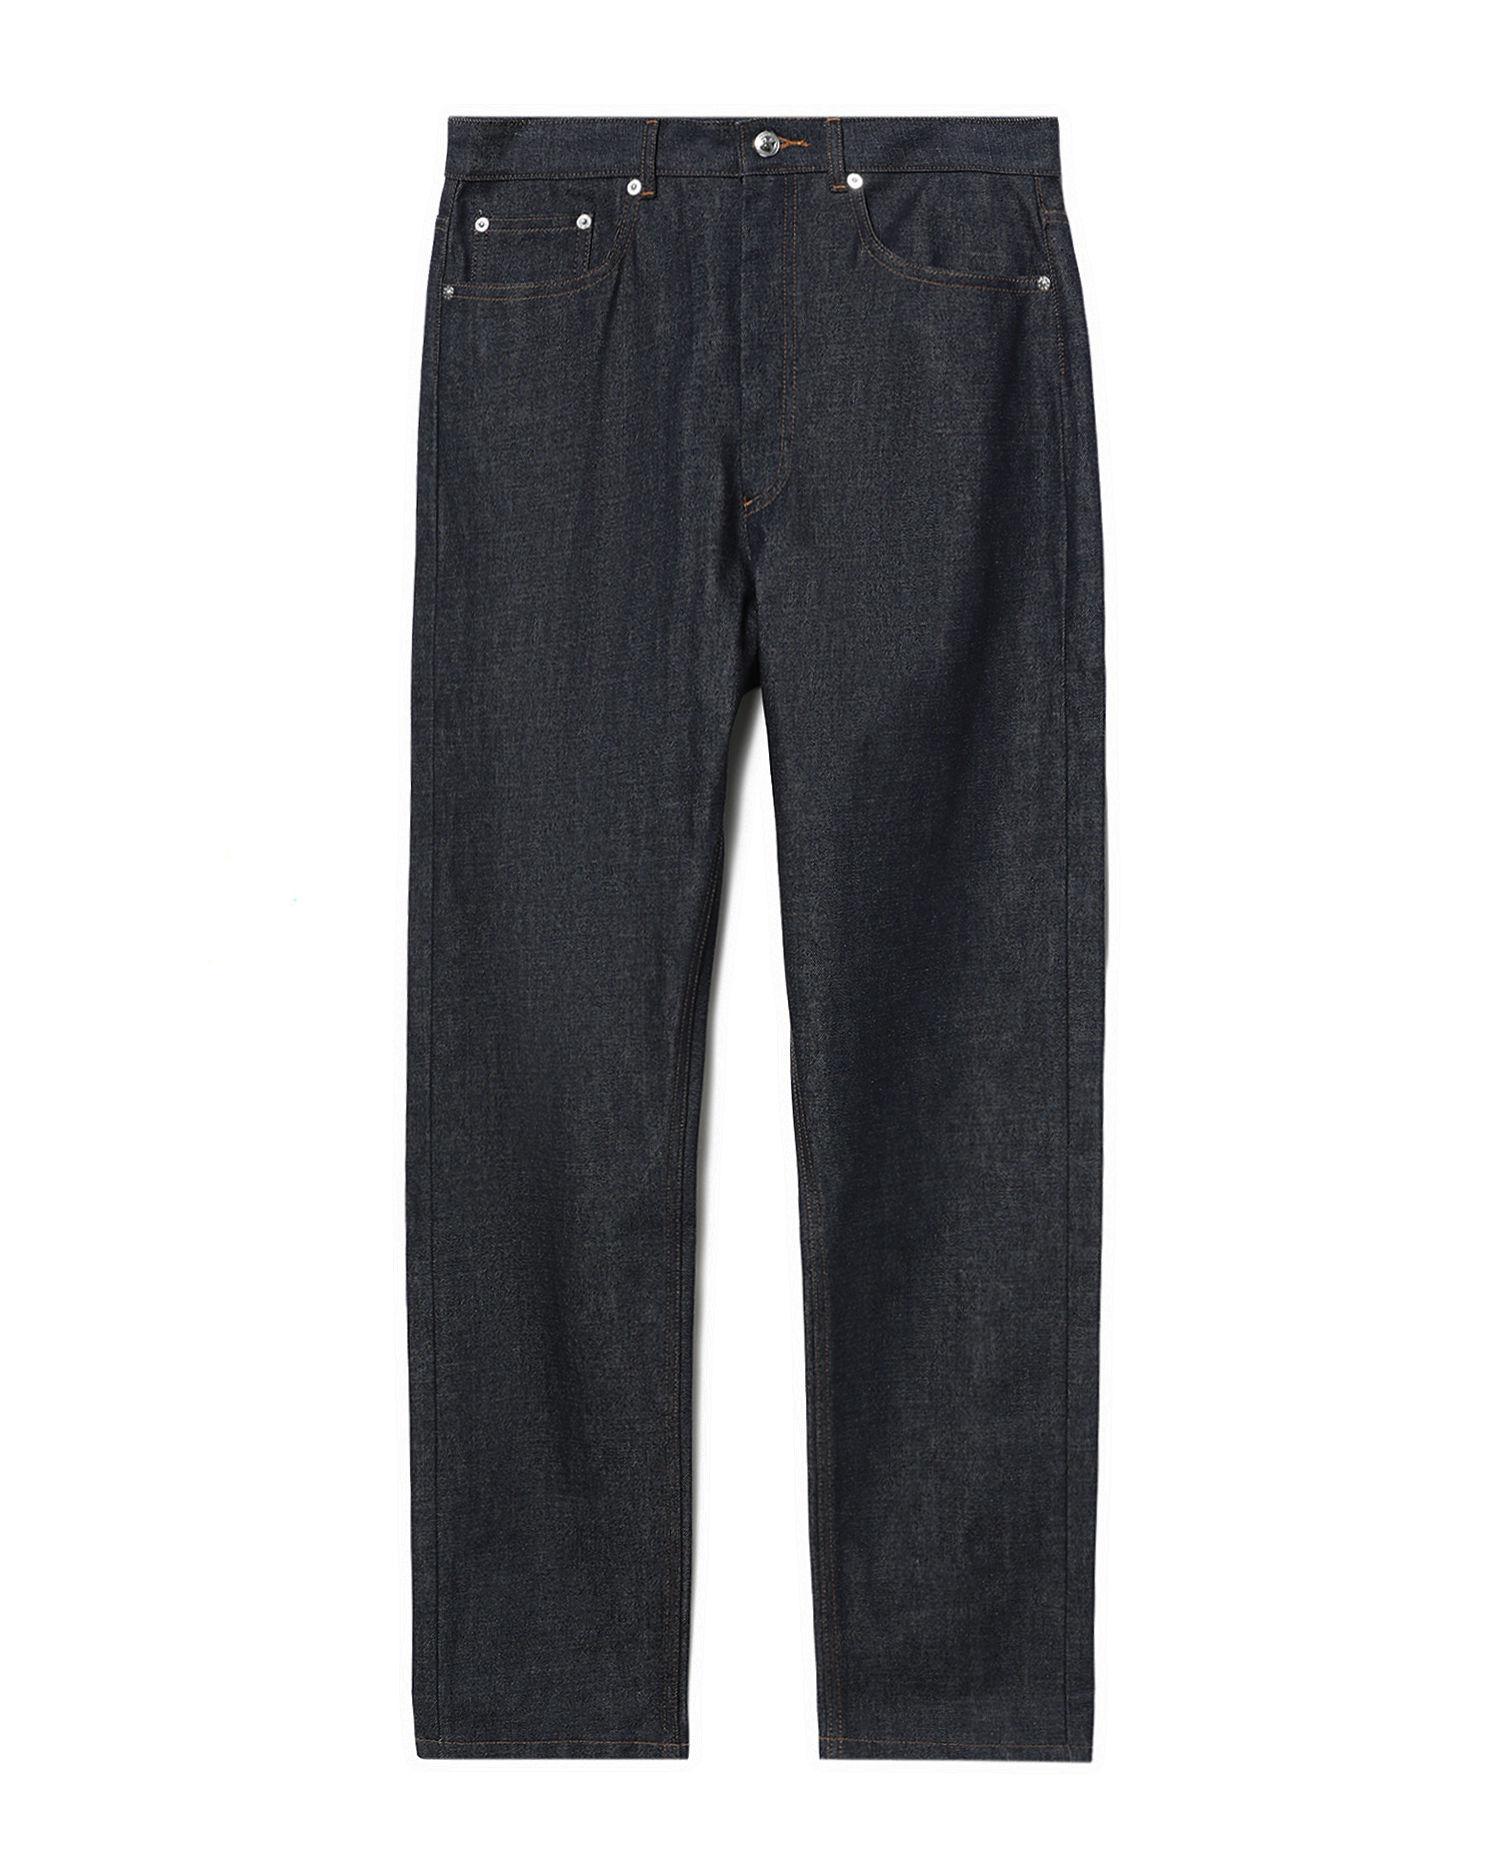 Martin jeans by A.P.C.